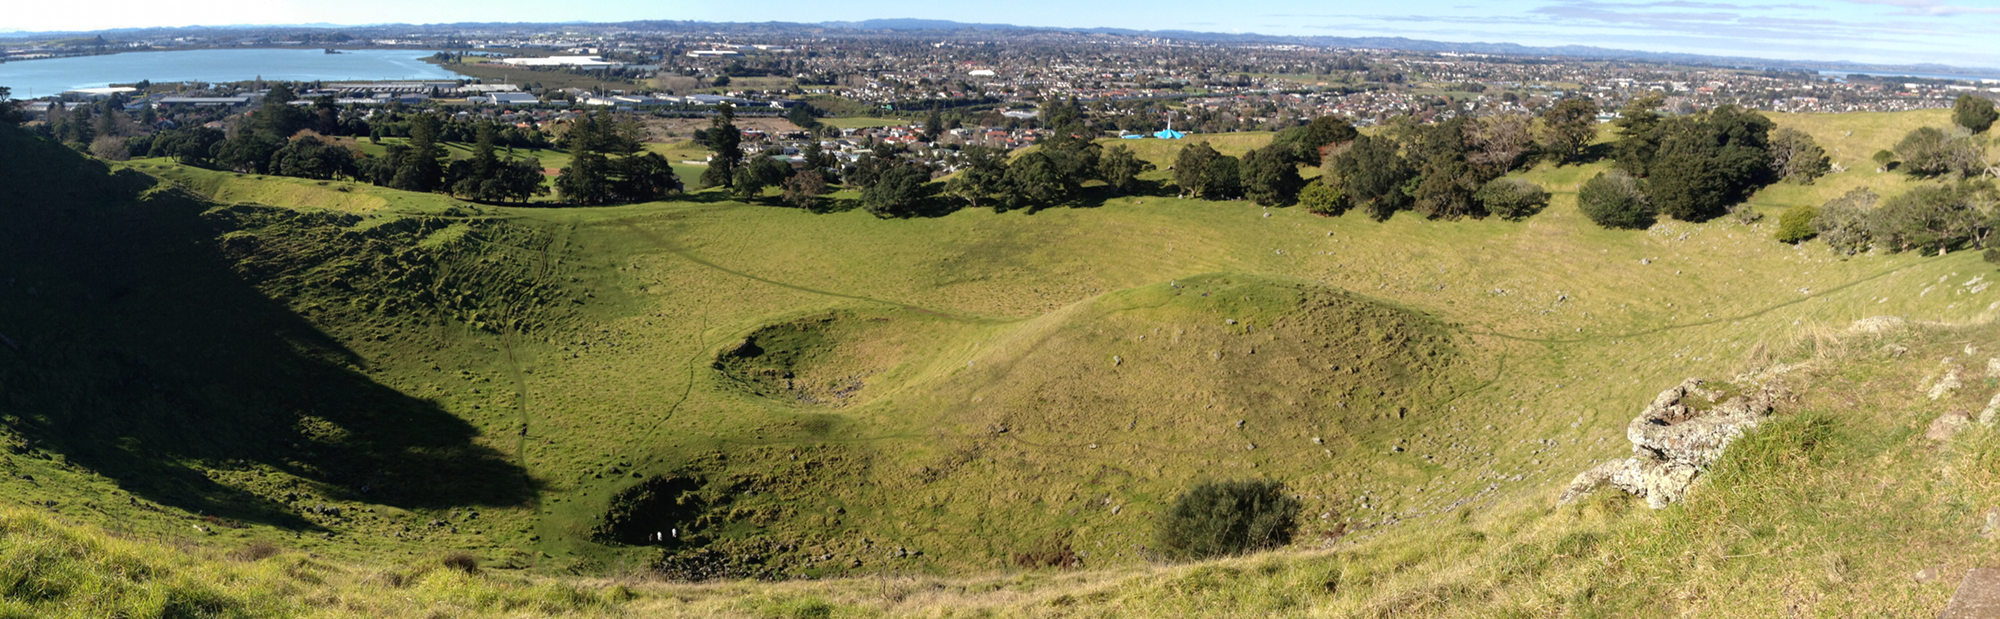 Mangere Mounter Crater from the Rim